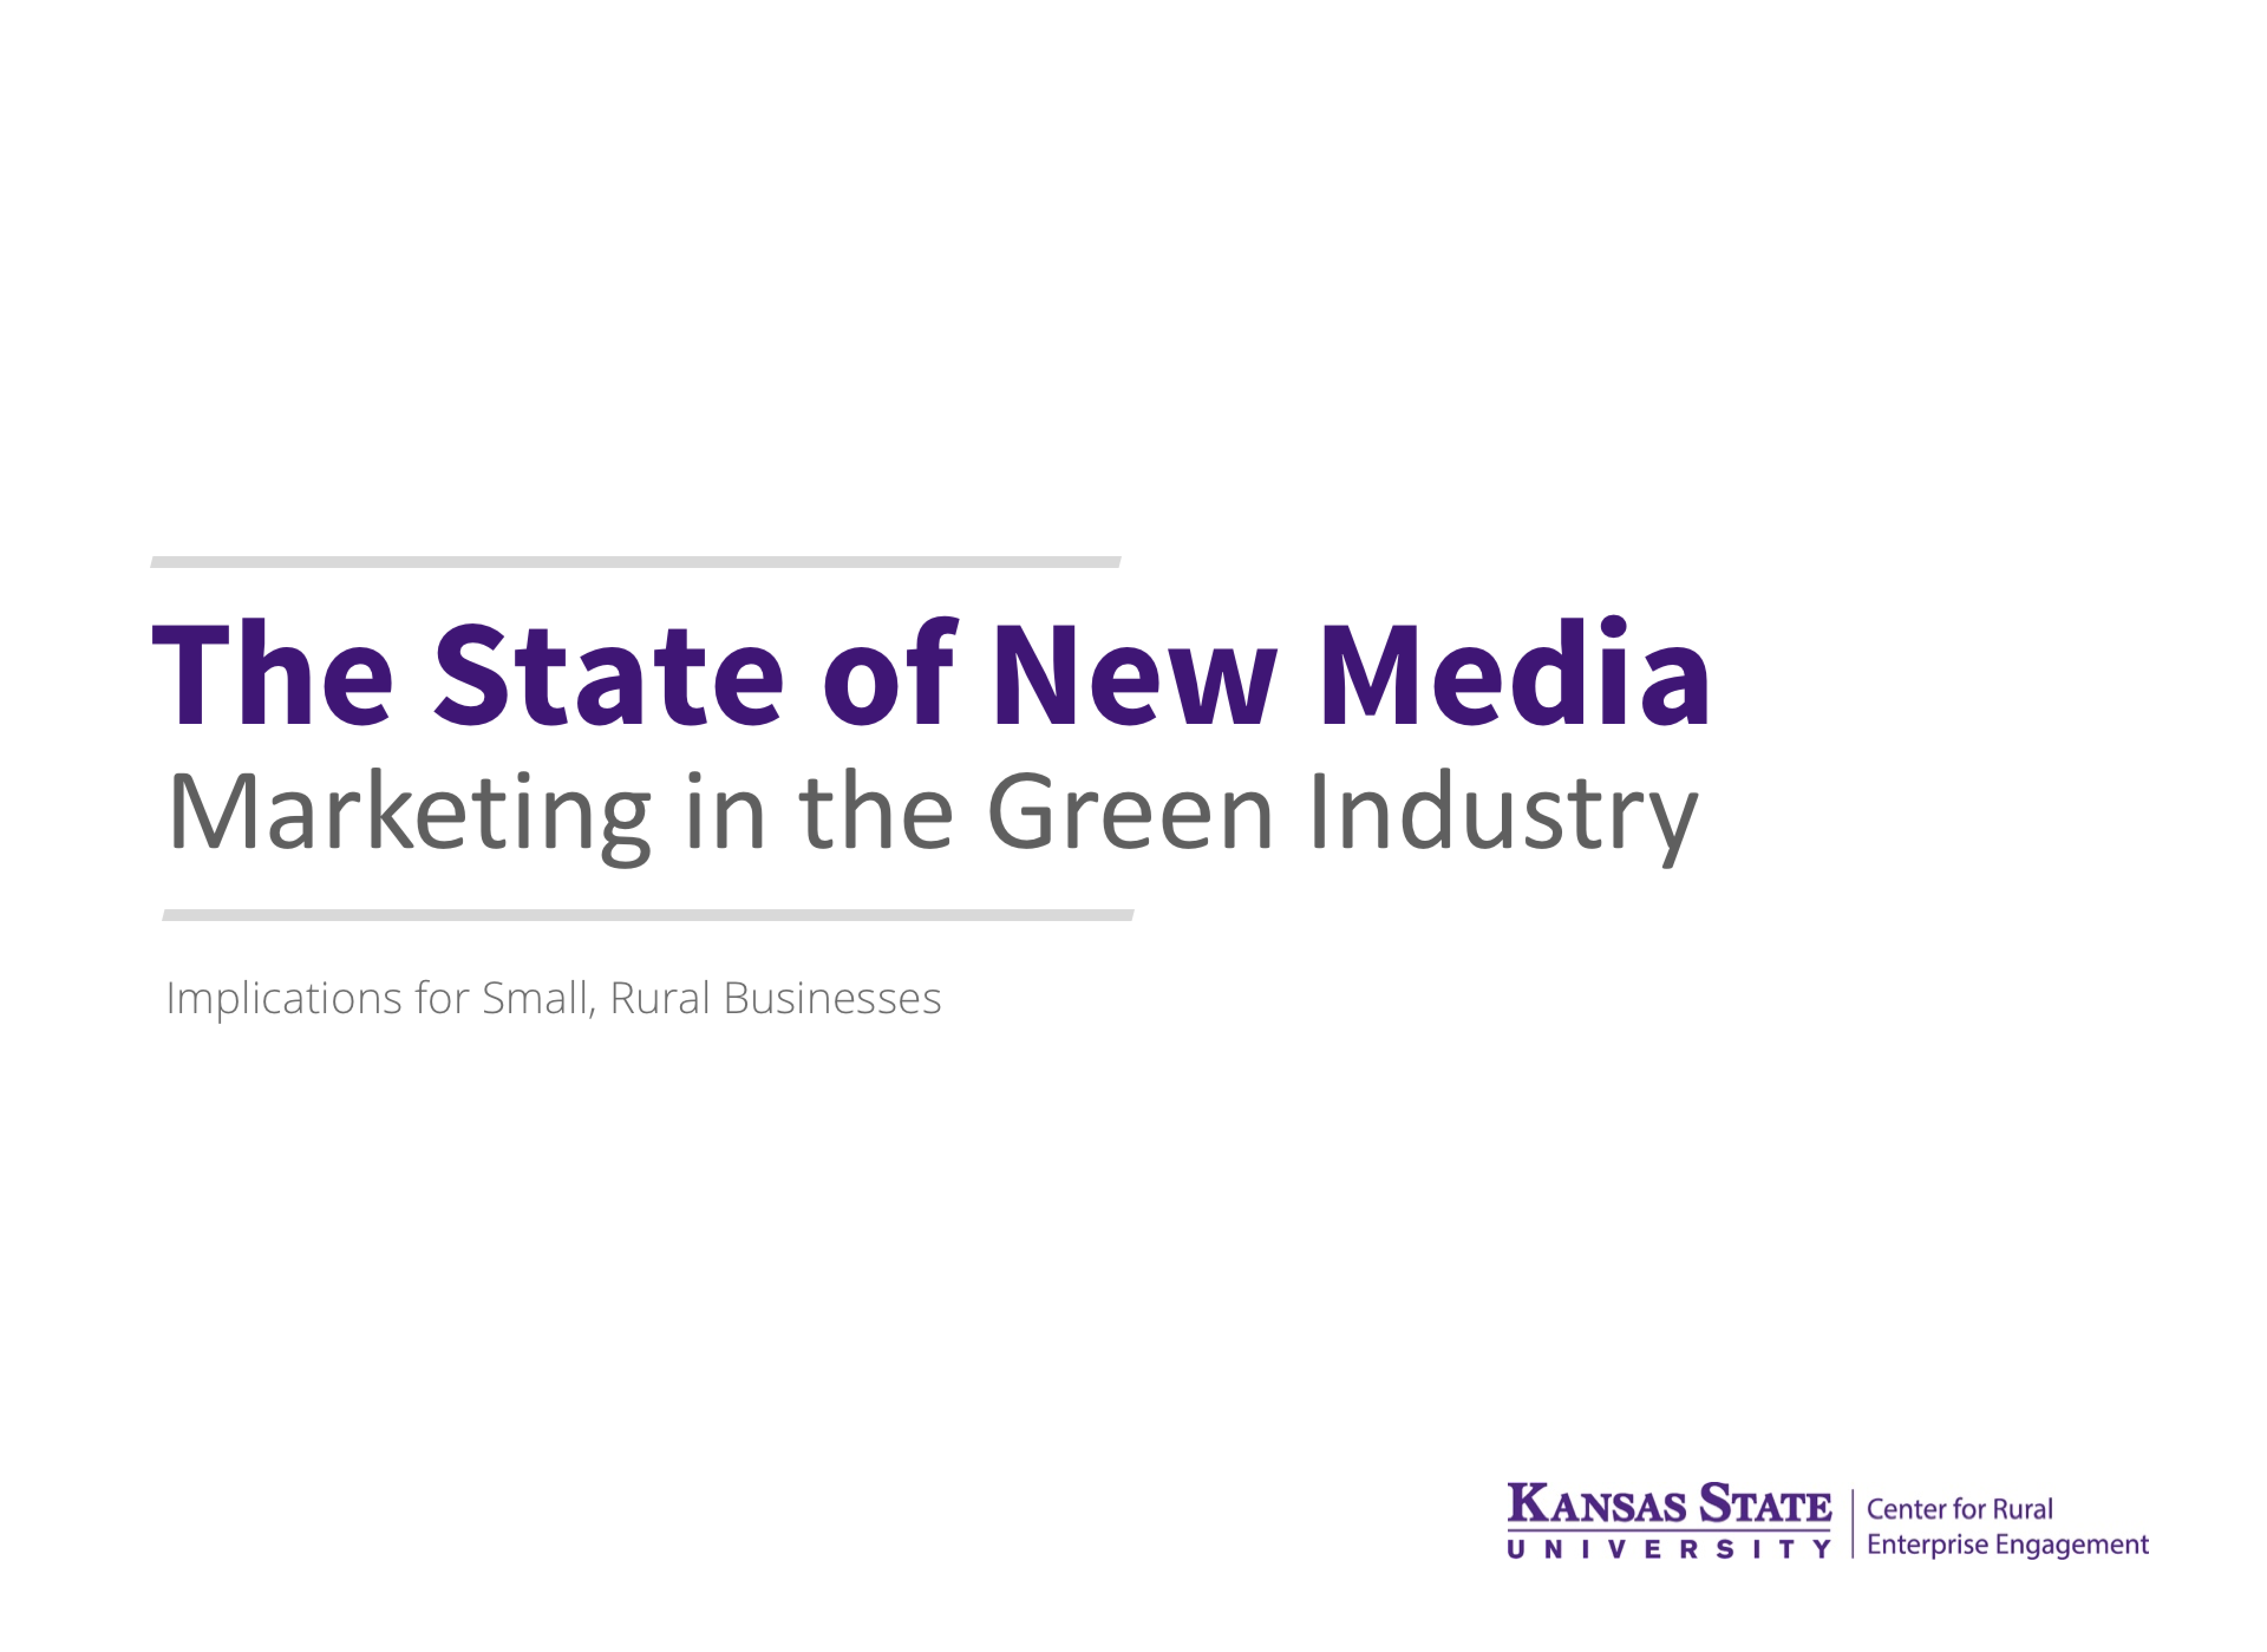 The State of New Media Marketing